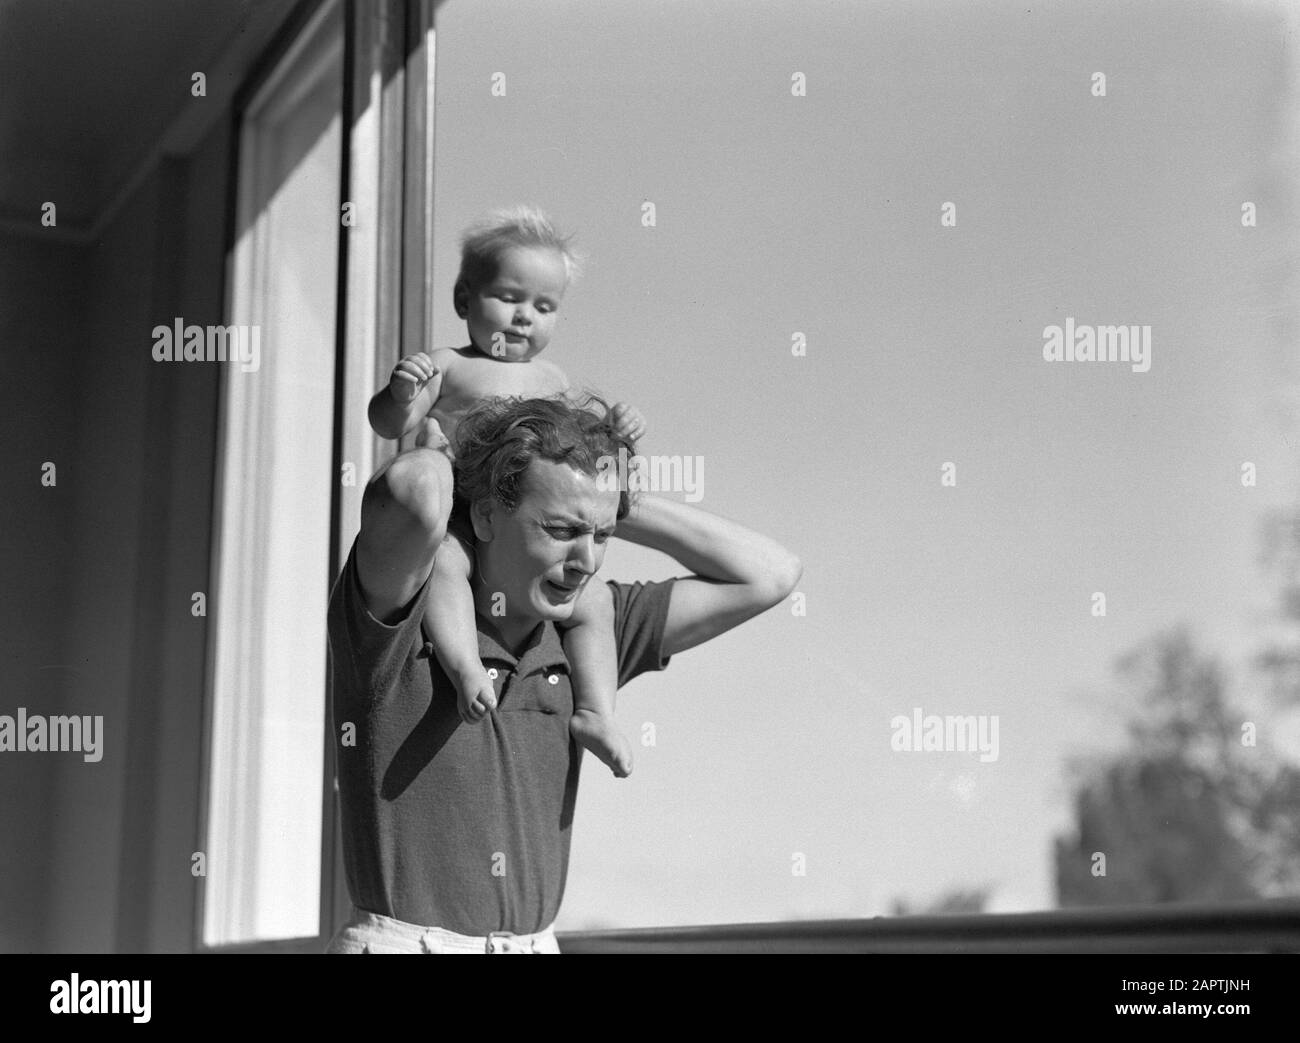 The family Kiraly The little boy of the Parisian couple Kiraly, on the  shoulders of his father Date: October 1936 Location: France, Paris  Keywords: babies, fathers Personal name: Kiraly Stock Photo - Alamy